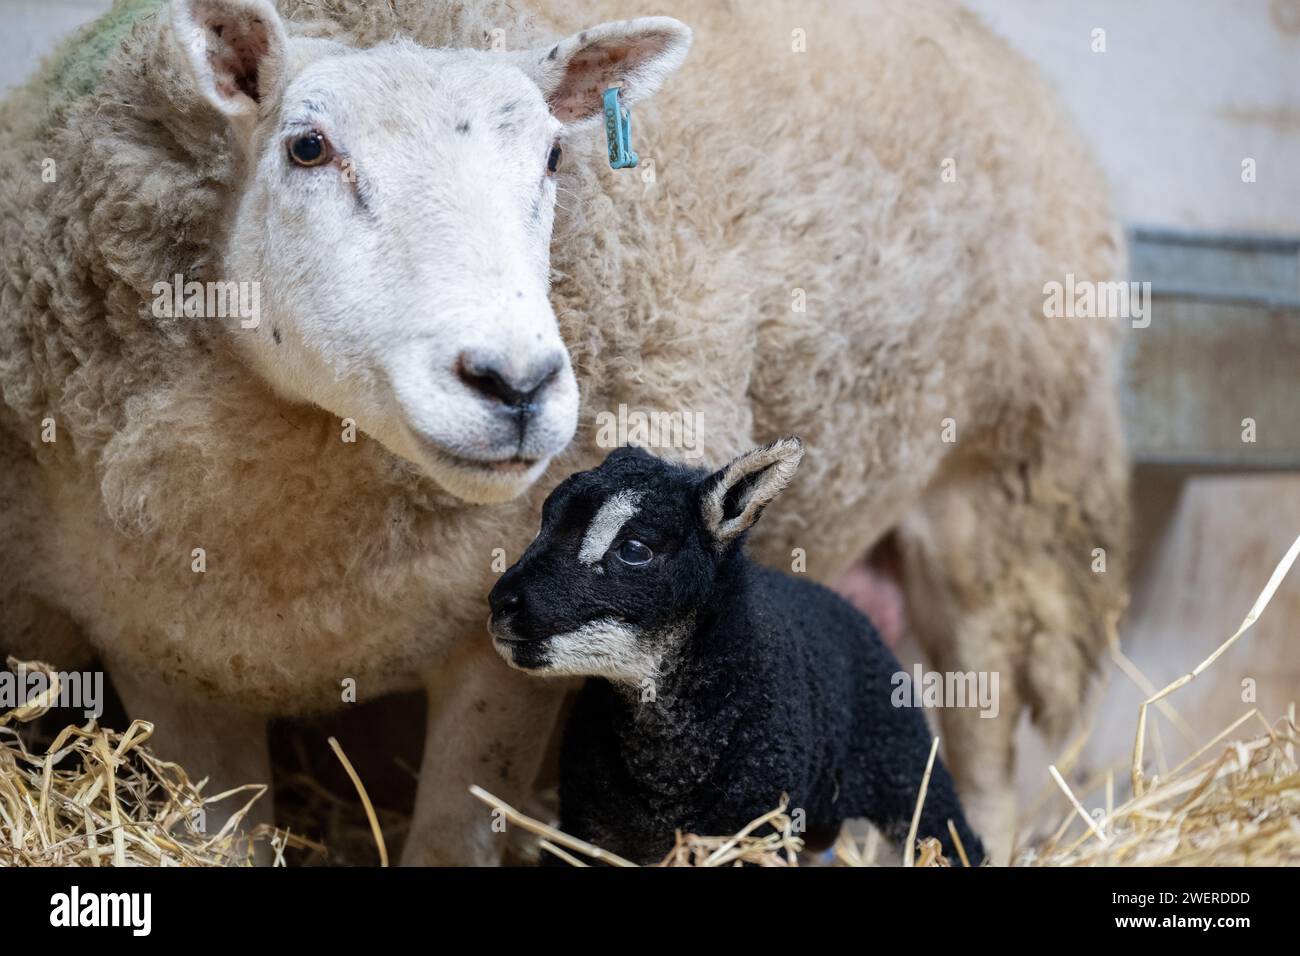 Crossbred ewe with a pedigree Badger Faced Texel at foot as a result of an embryo transplant breeding program. Cumbria, UK. Stock Photo